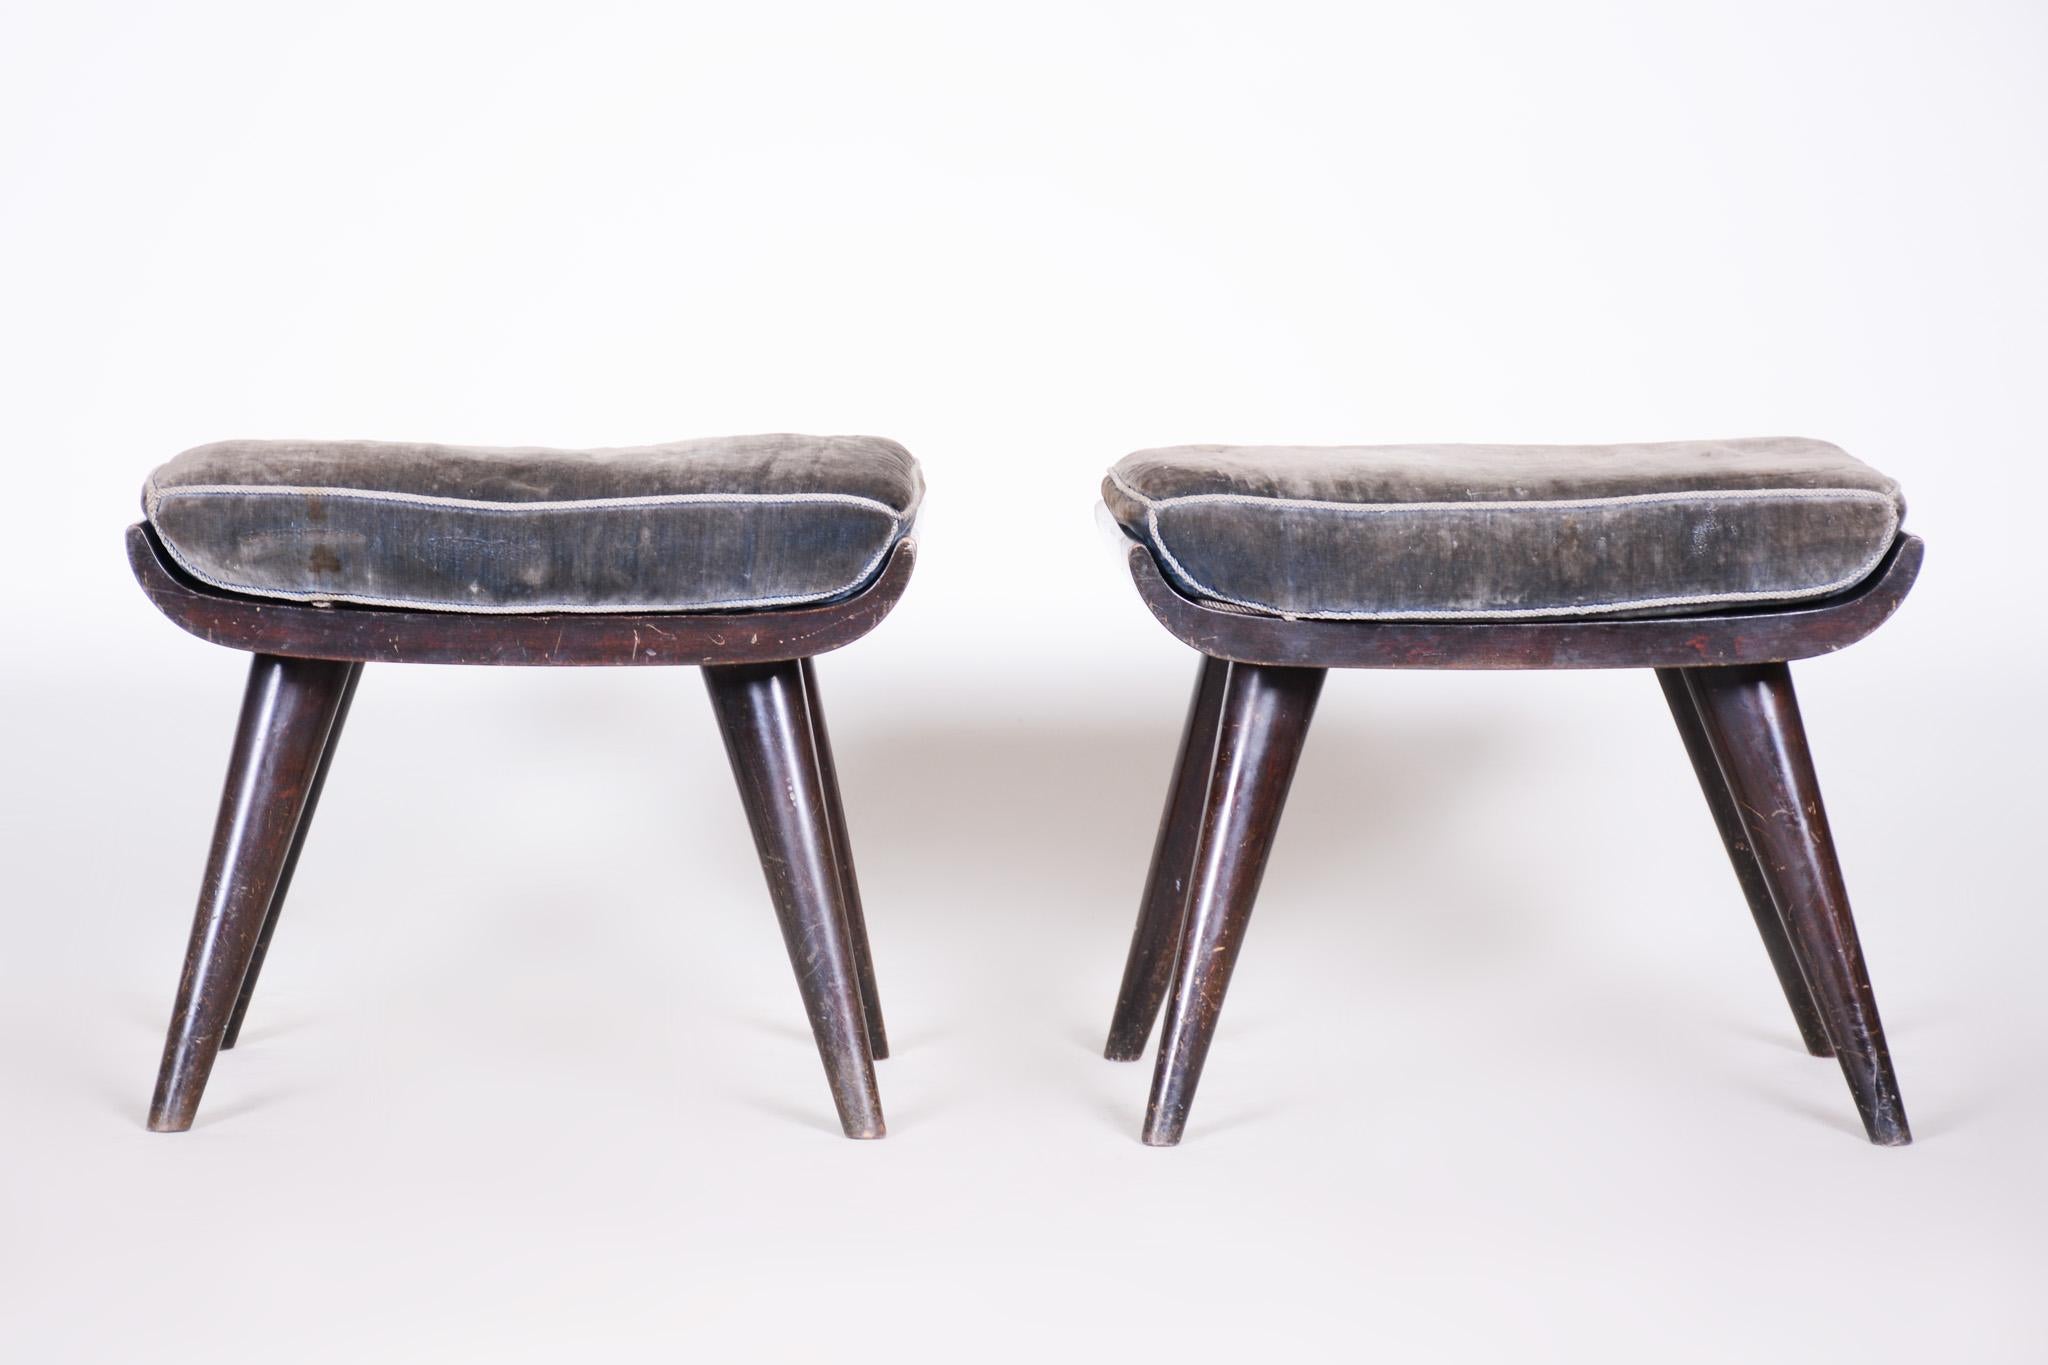 Pair of Art Deco Beech Stools, Original Preserved Condition, Czech, 1920s In Good Condition For Sale In Horomerice, CZ